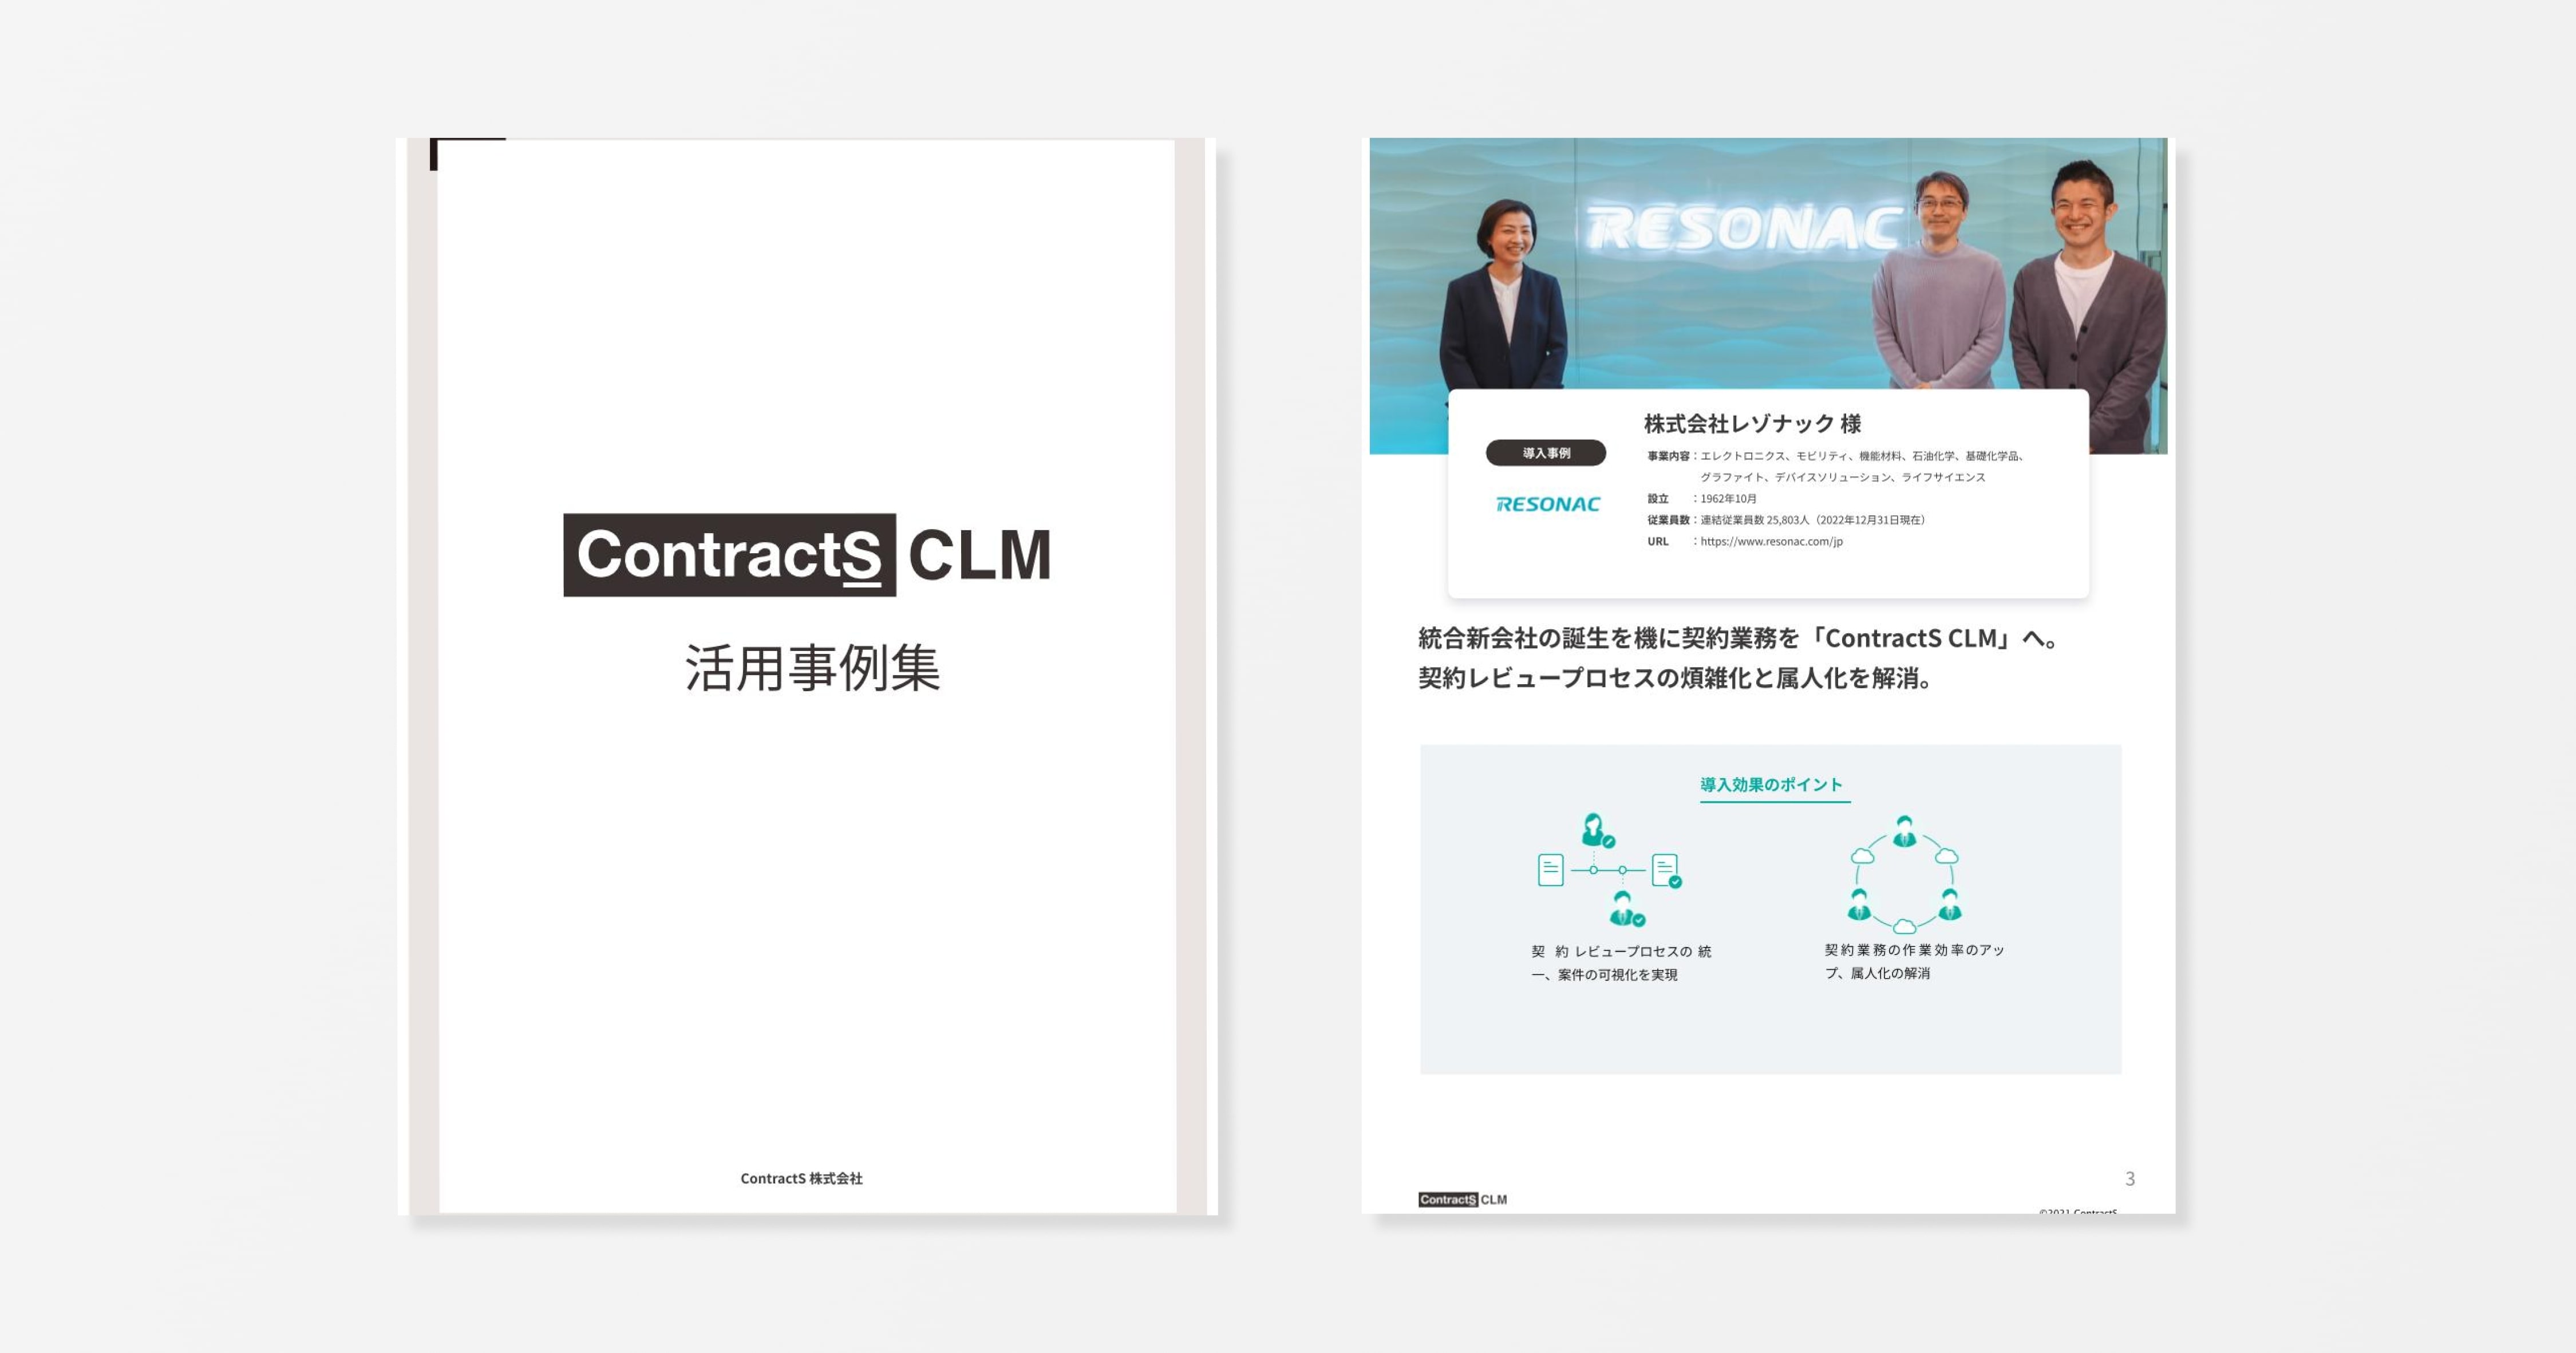 ContractS CLM（コントラクツCLM）活用事例集